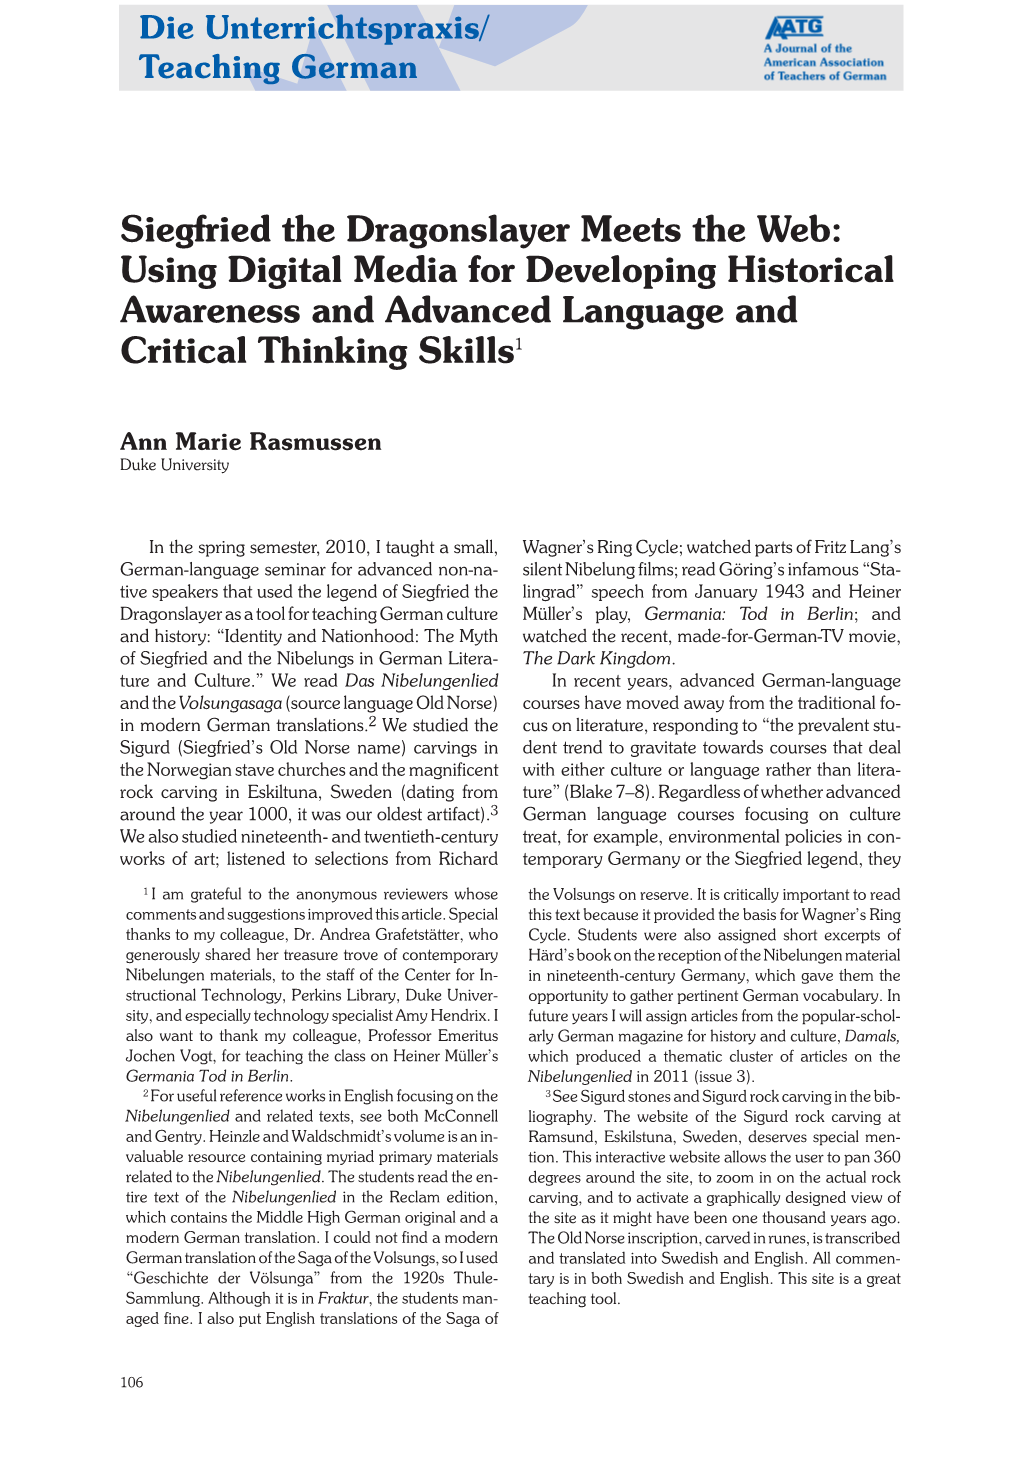 Siegfried the Dragonslayer Meets the Web: Using Digital Media for Developing Historical Awareness and Advanced Language and Critical Thinking Skills1